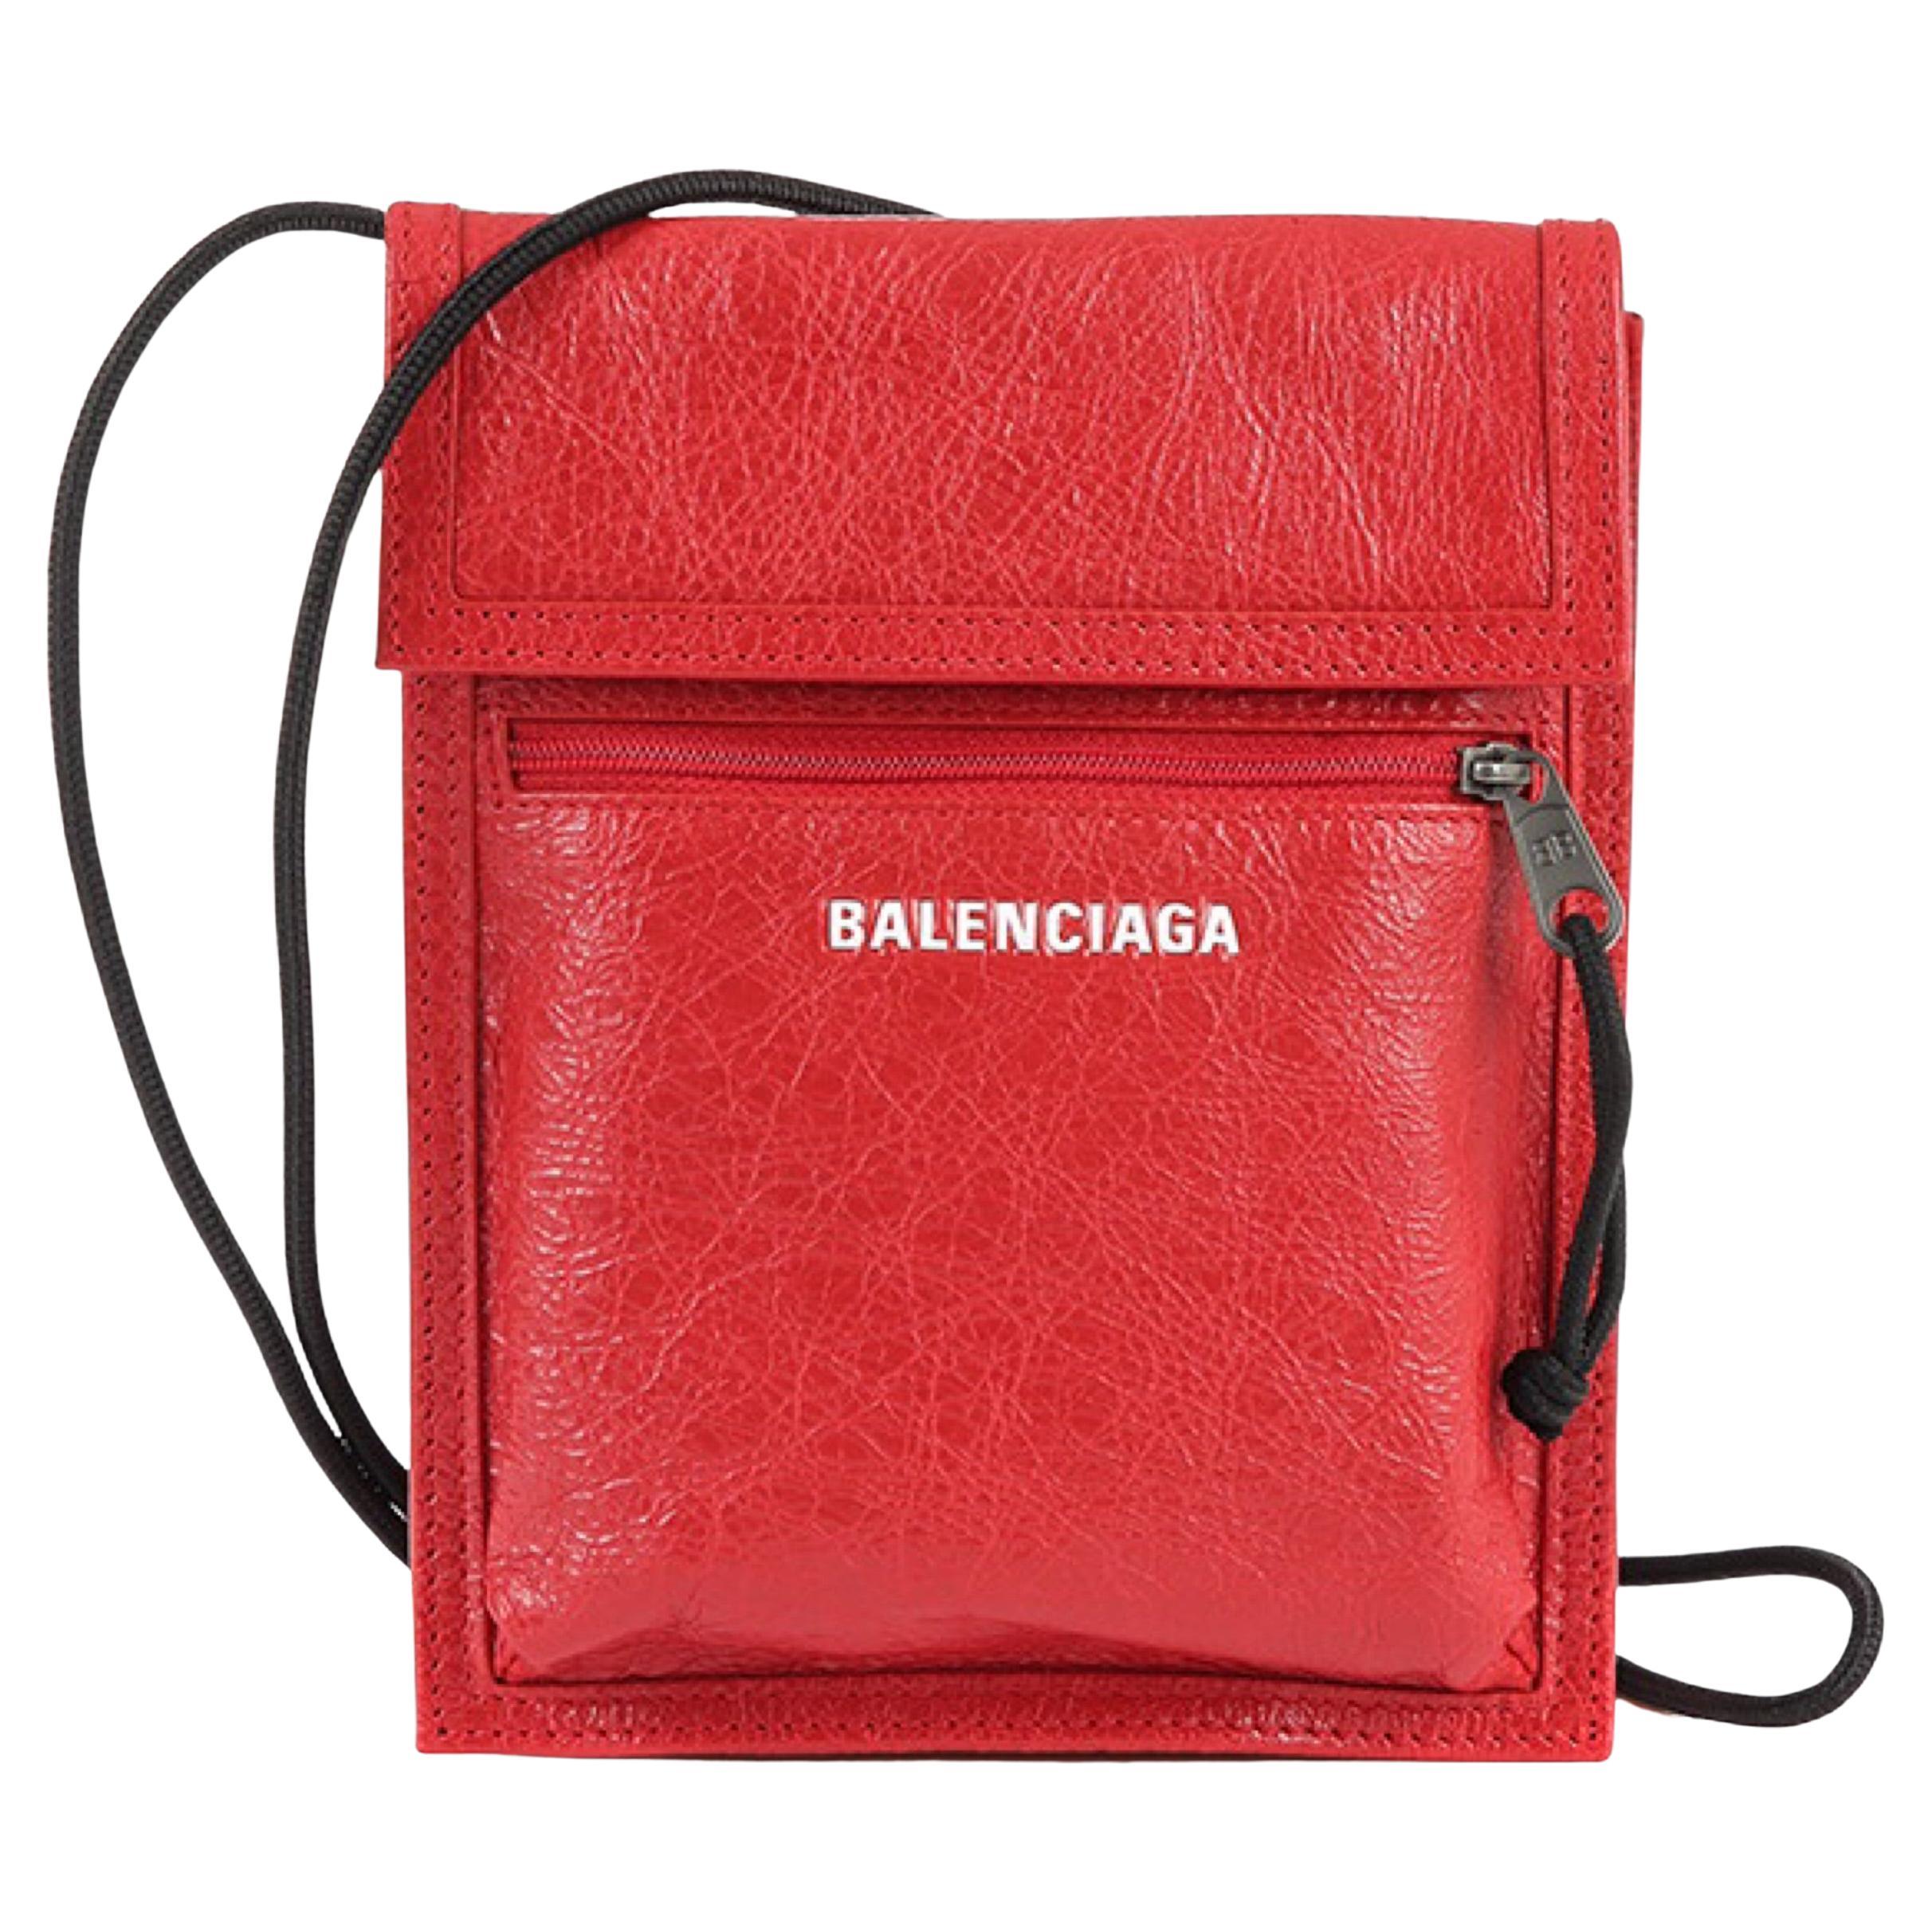 NEW Balenciaga Red Explorer Cracked Leather Pouch Crossbody Bag For Sale